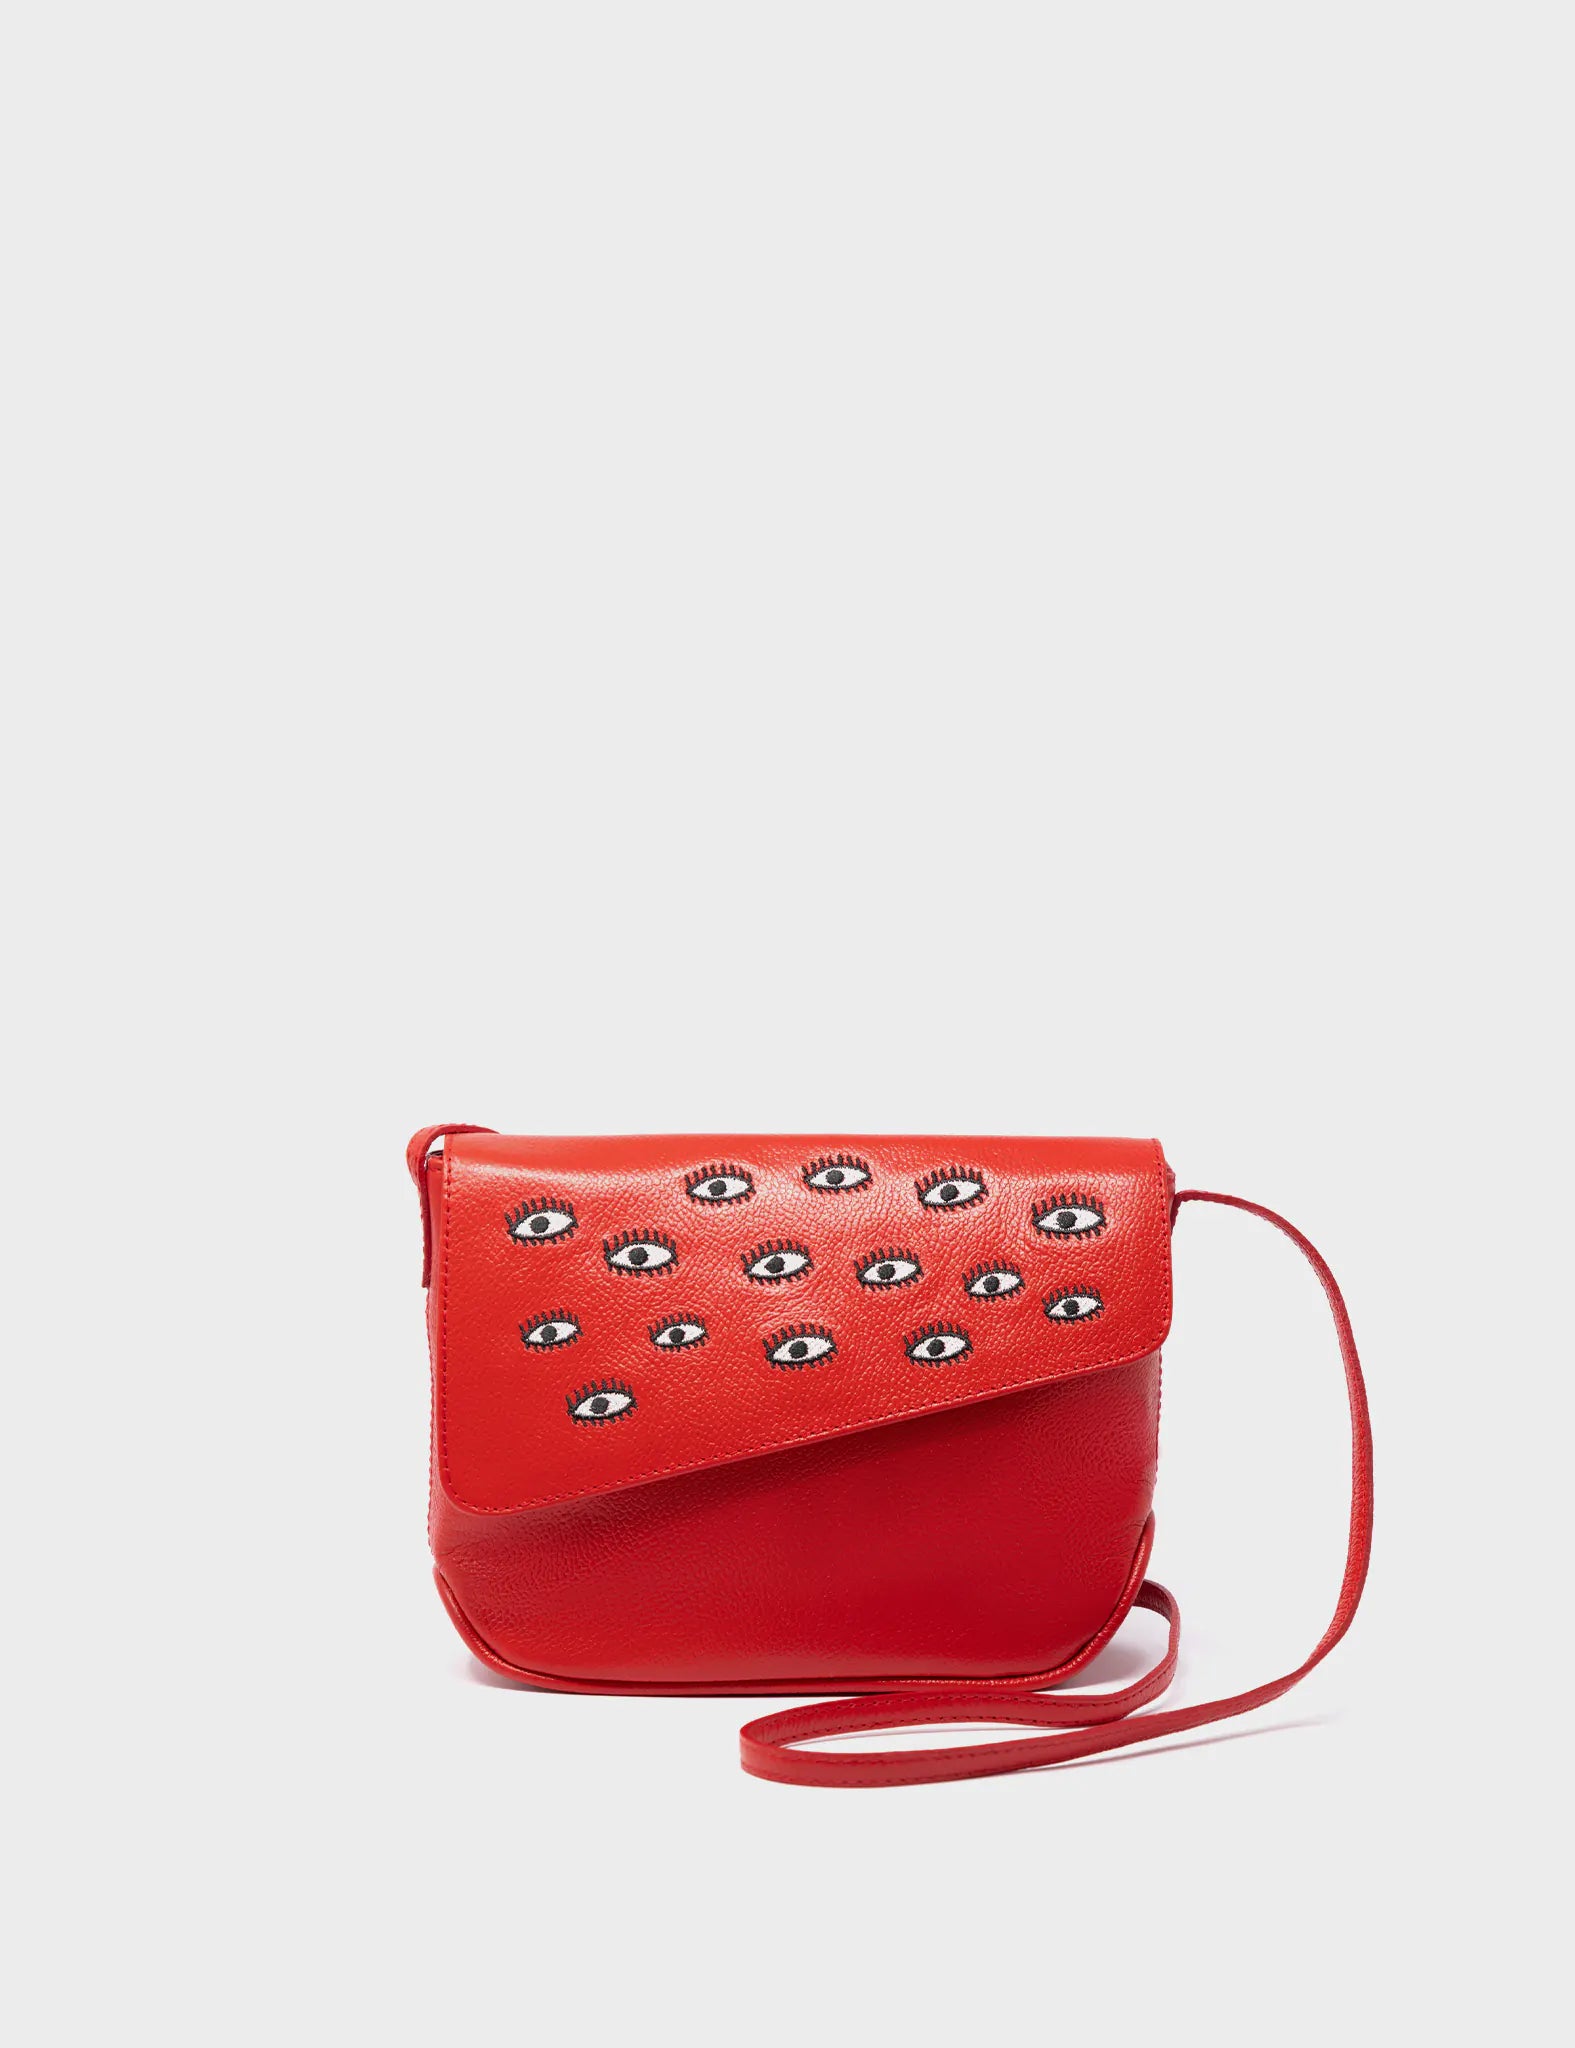 Bruno Mini Crossbody Red Leather Bag - All Over Eyes Embroidery - Front View